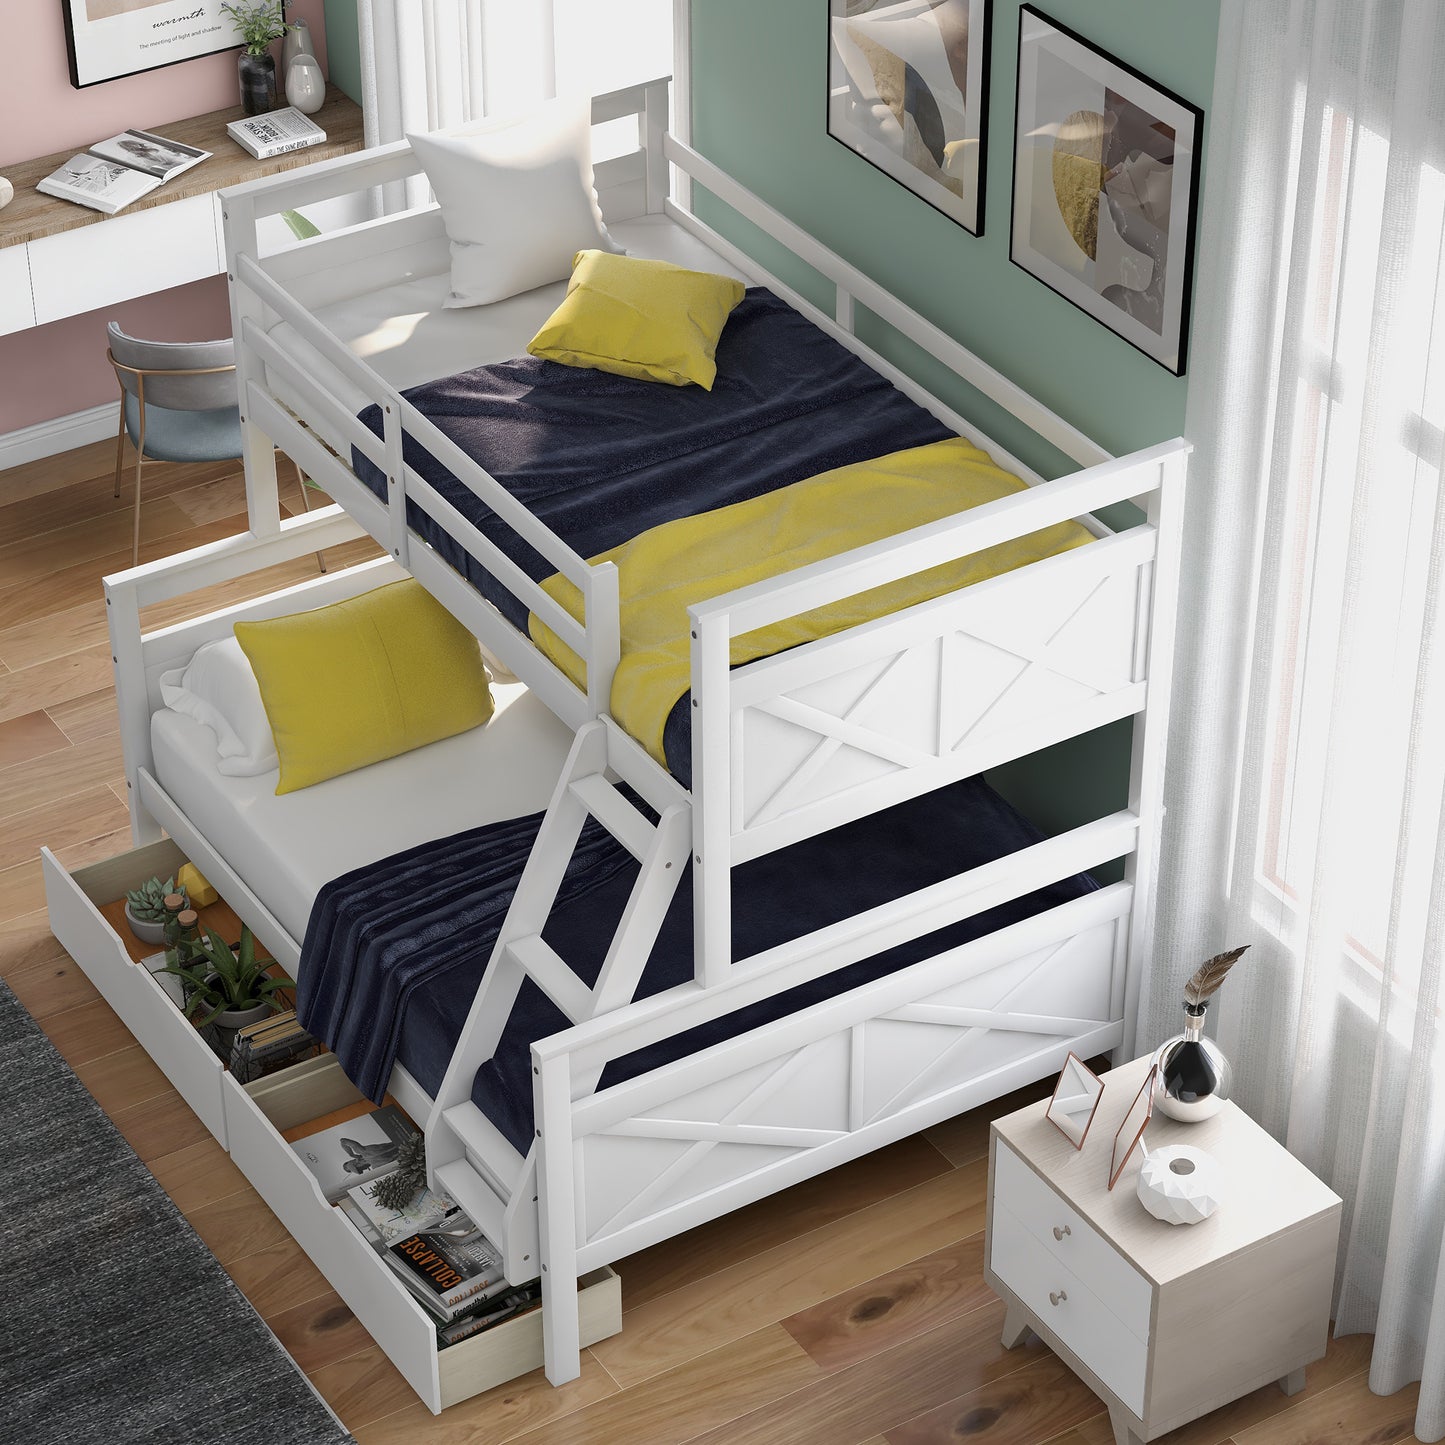 White X Twin over Full Bunk Bed with Storage